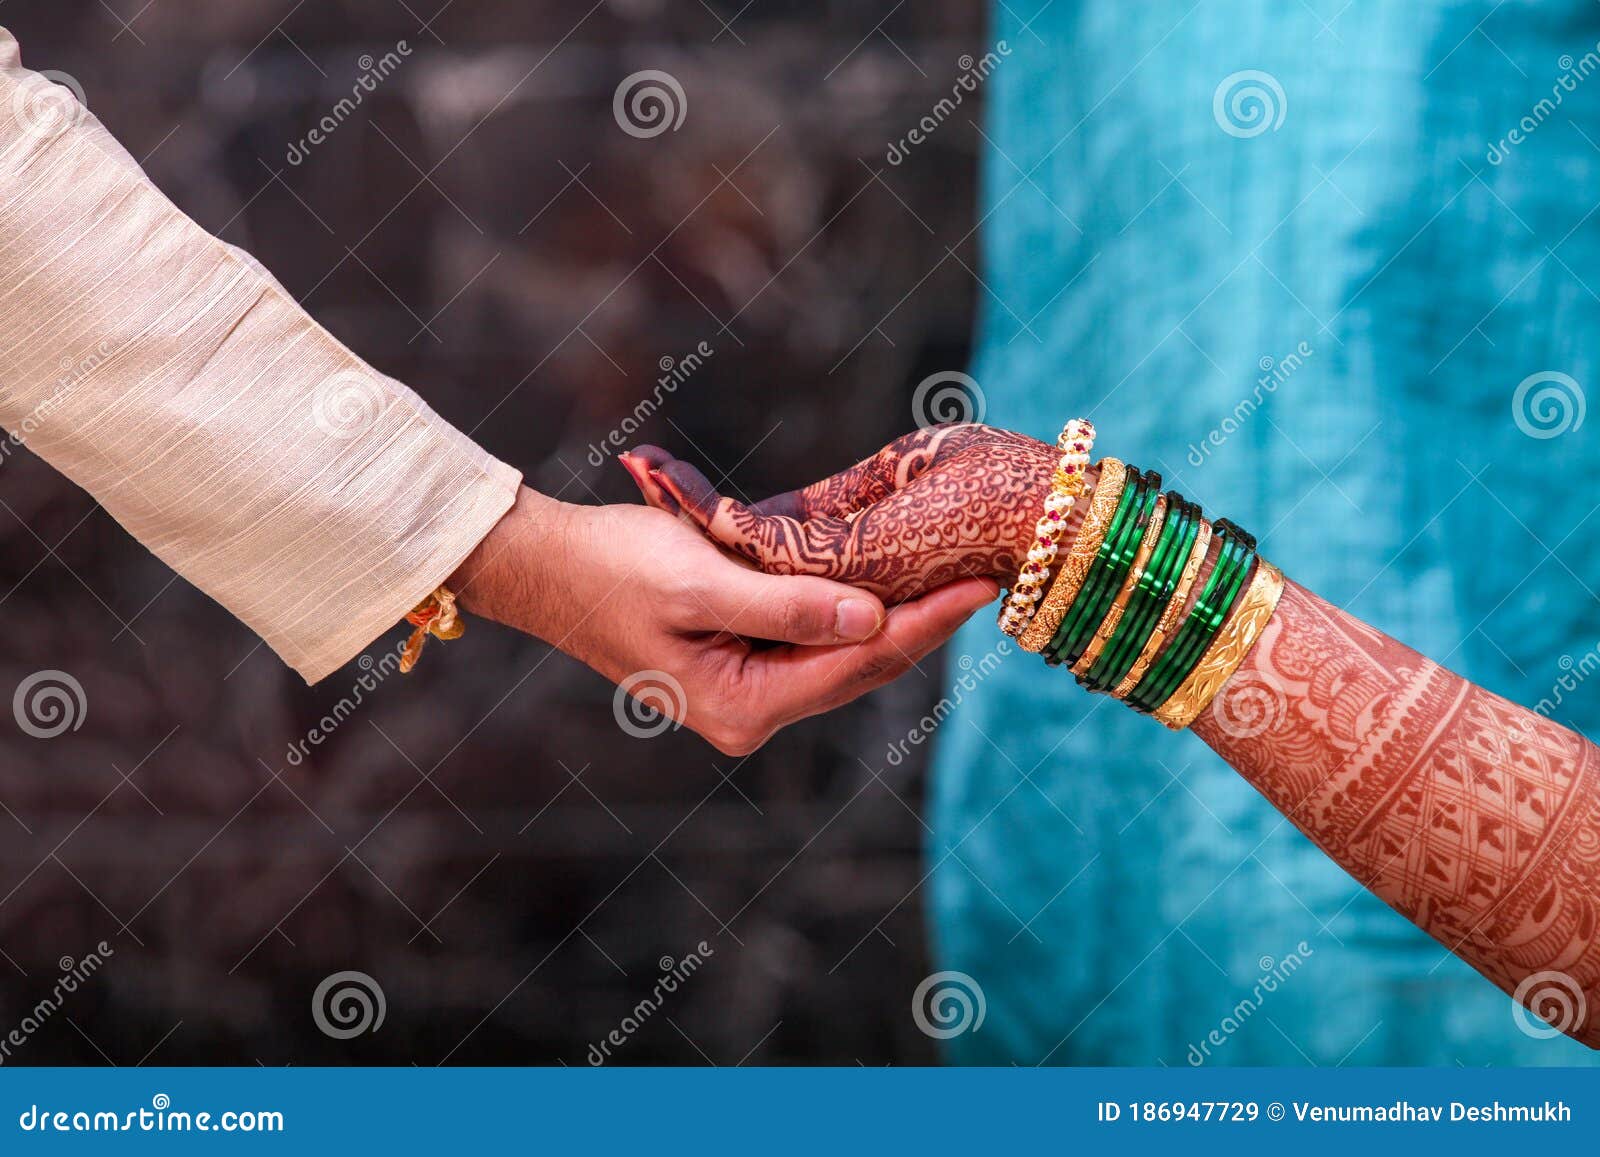 Indian Bride and Groom Holding Hands Stock Image - Image of background,  ritual: 186947729